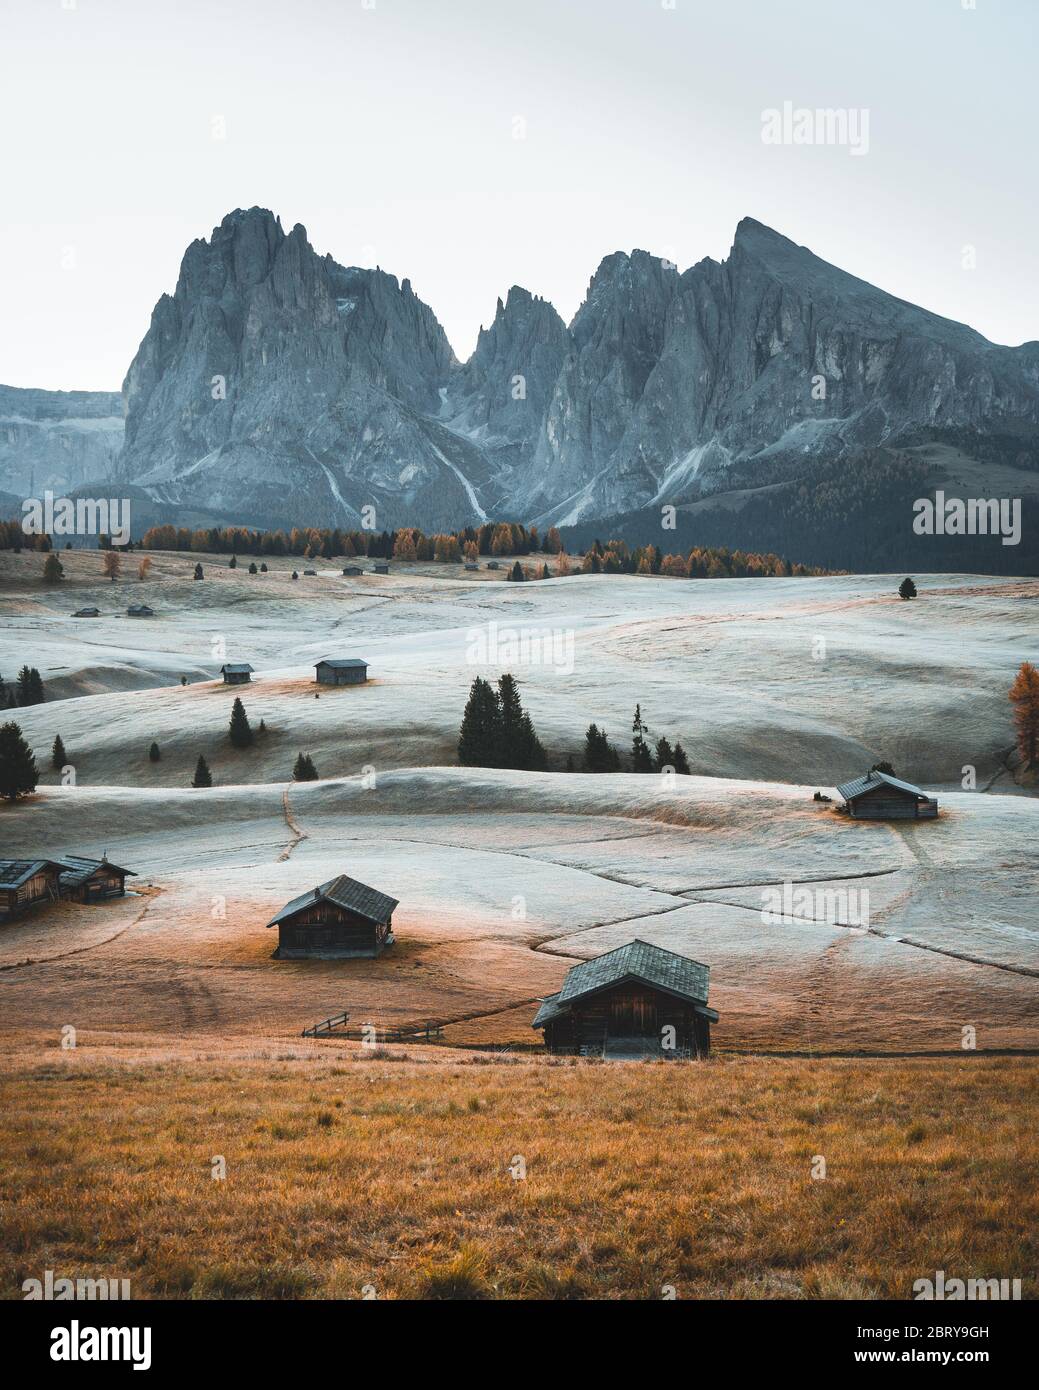 Small wooden farm house, cottage or log cabins on meadow on Alpe di Siusi, Seiser Alm. Alpe di Siusi or Seiser Alm with Sassolungo, Langkofel mountain Stock Photo